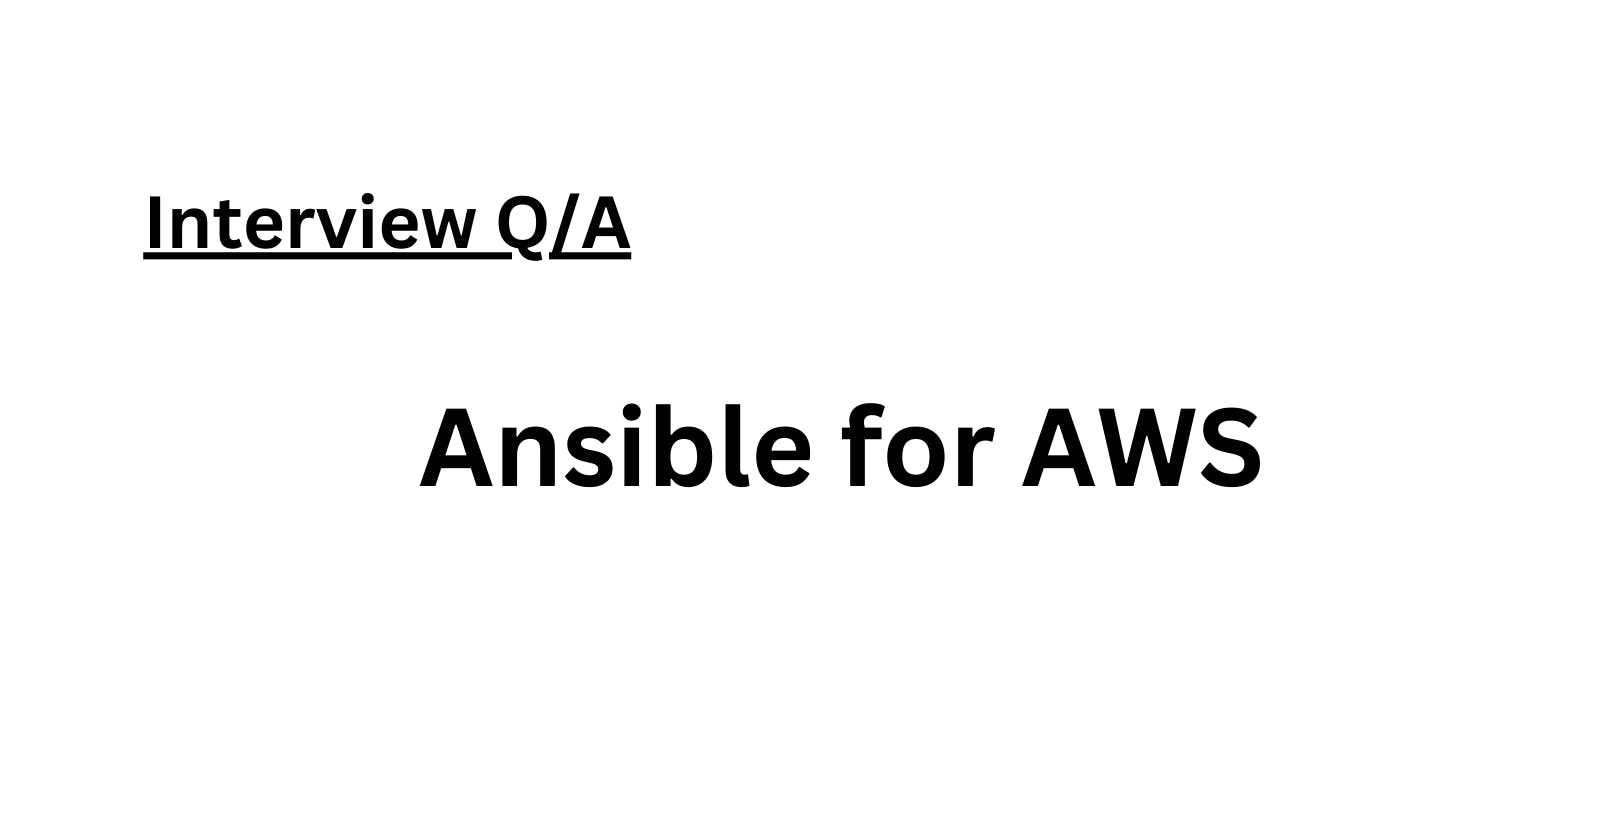 Ansible for AWS: Simplifying Cloud Management